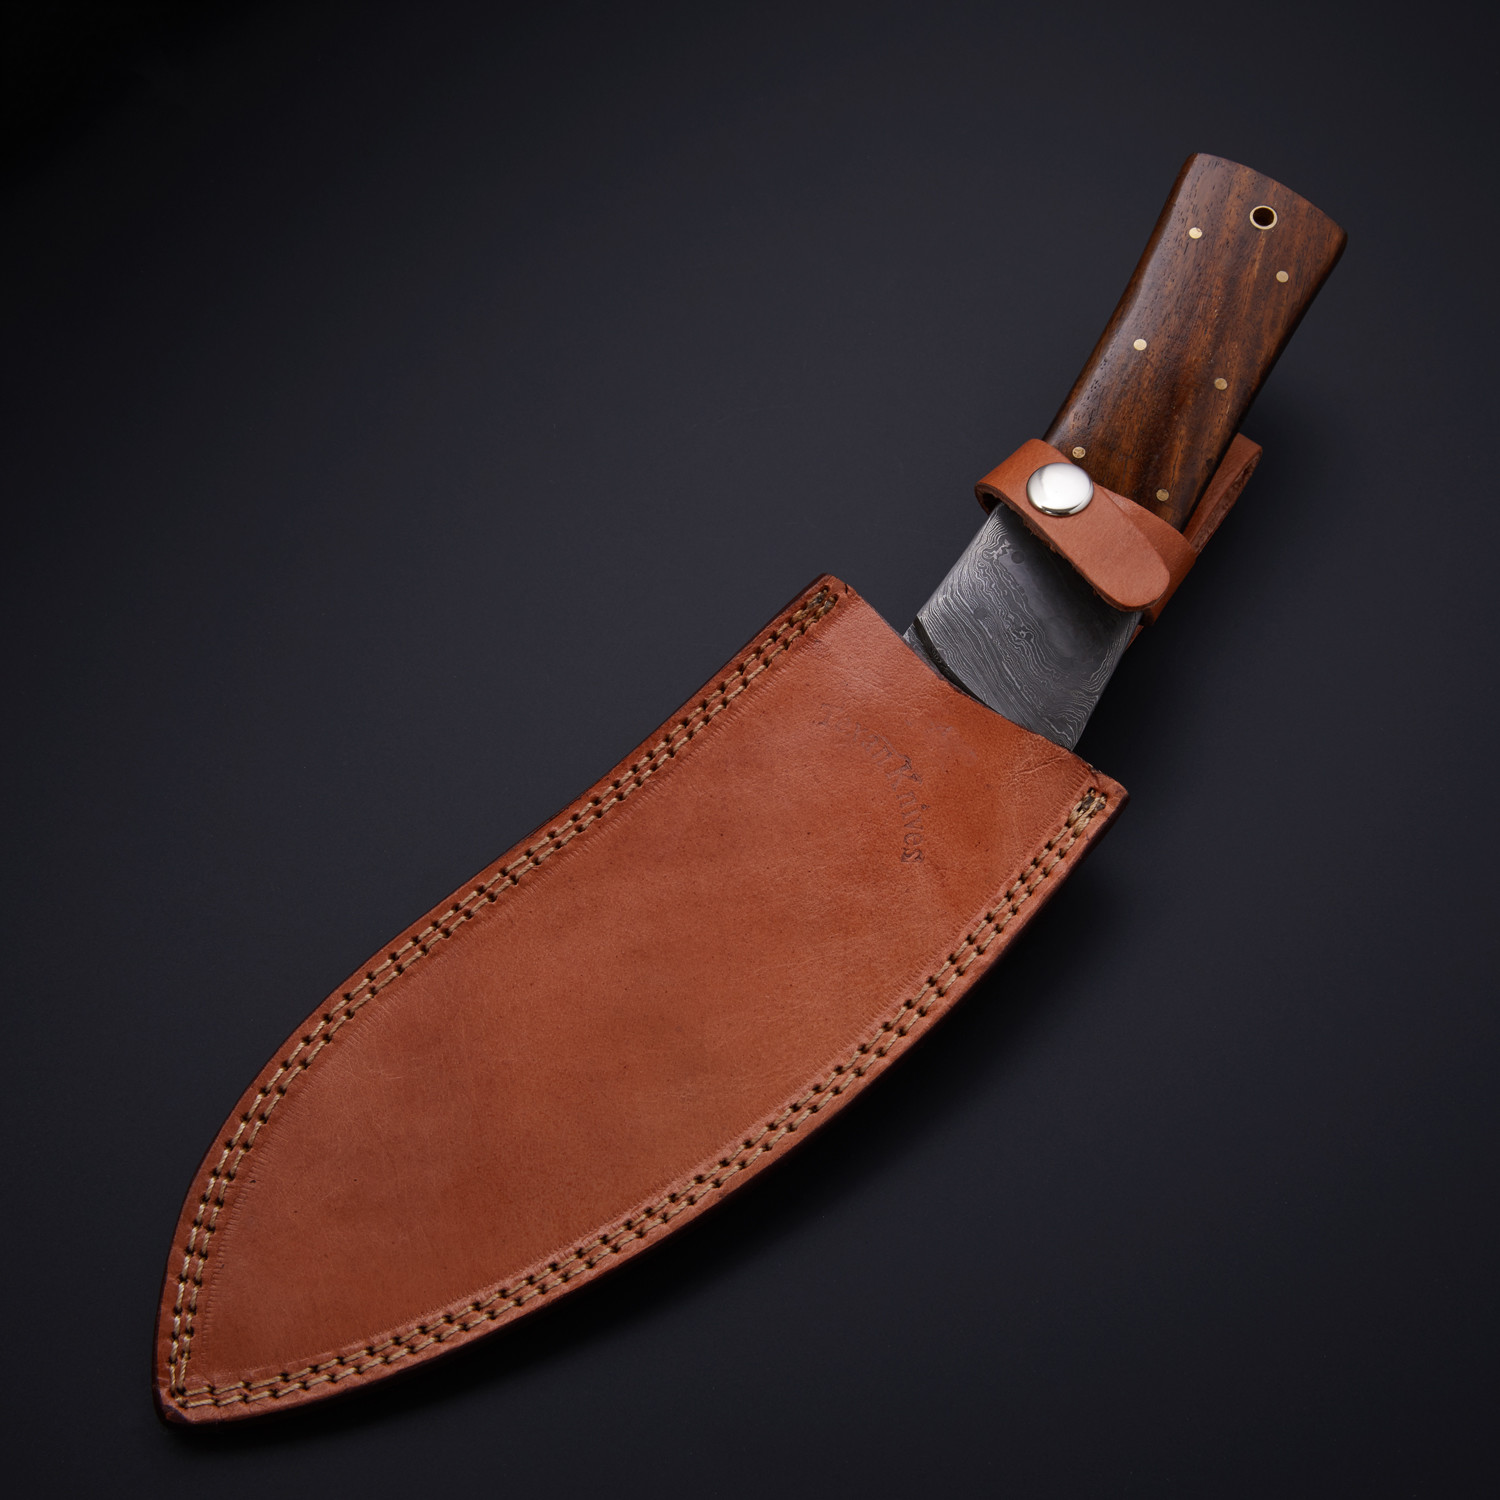 Giant Kukri - Texan Knives - Touch of Modern